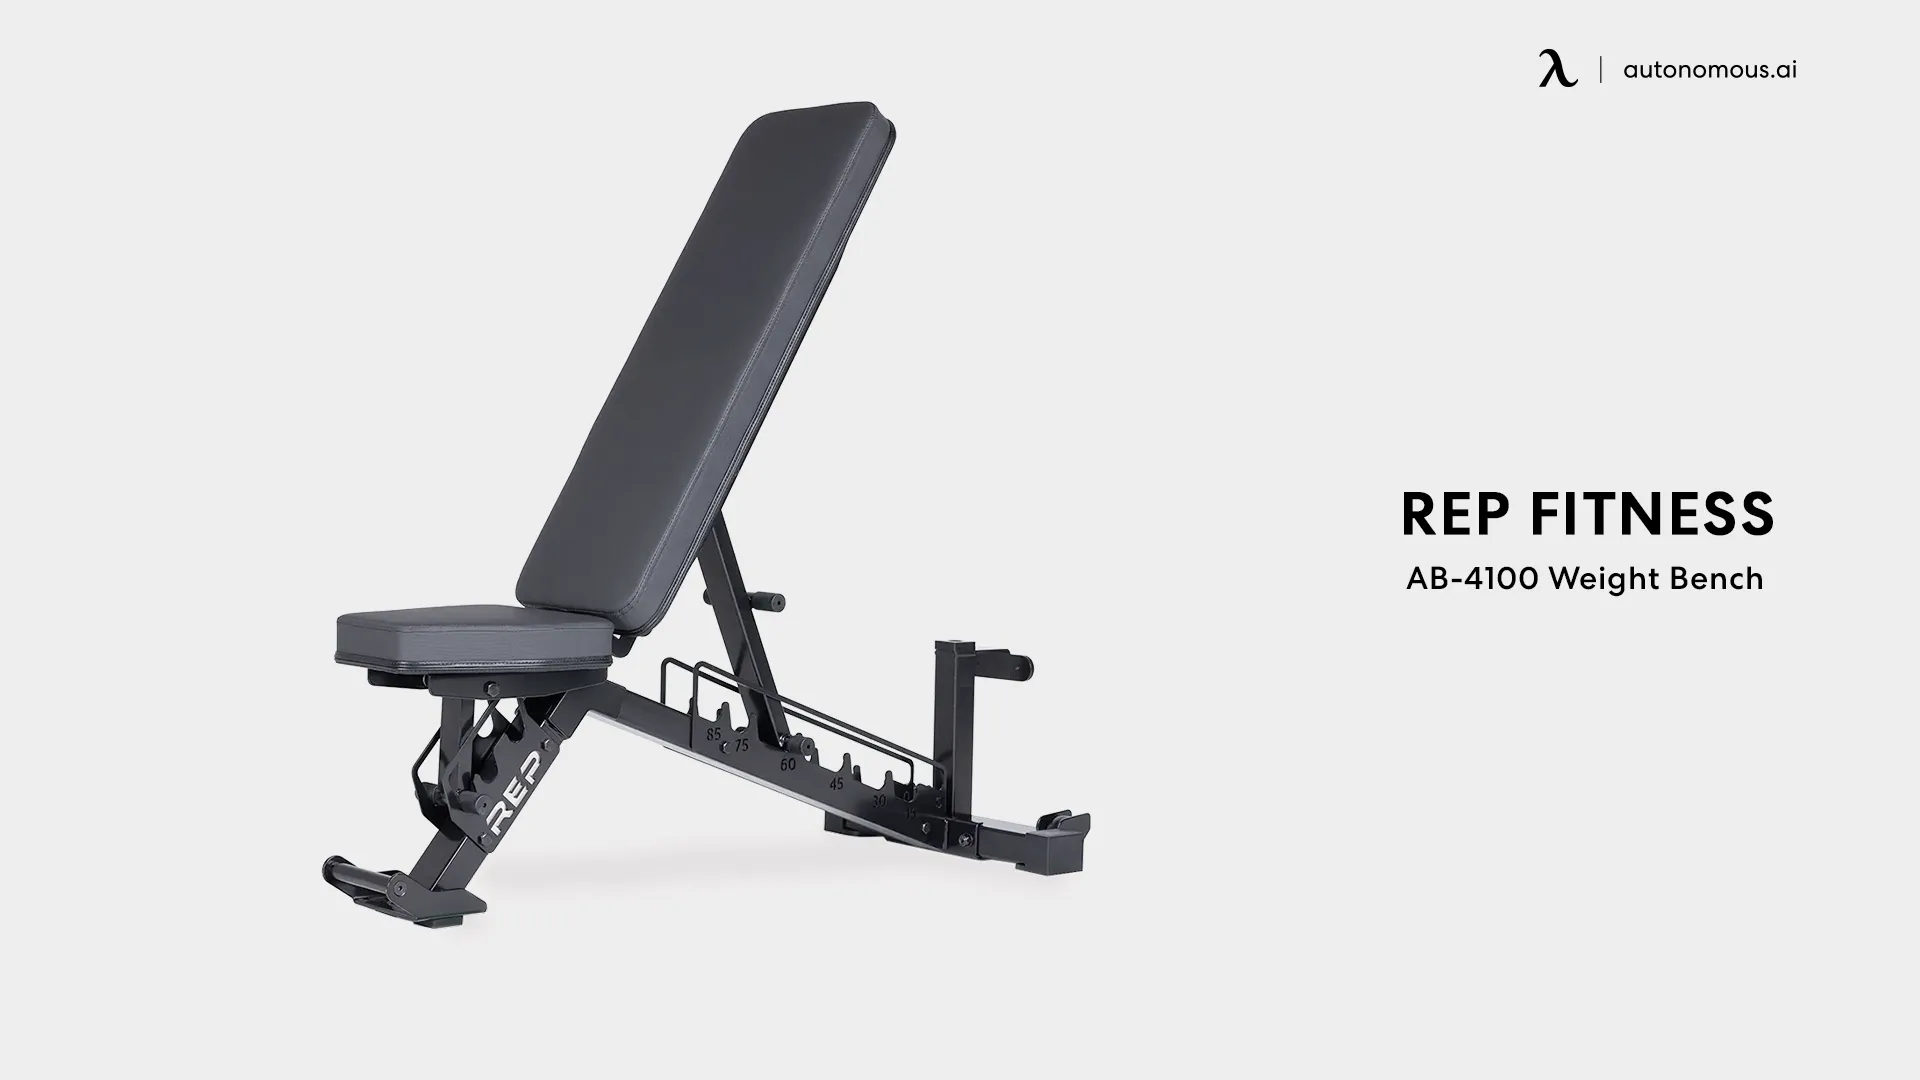 REP Fitness AB-4100 Weight Bench